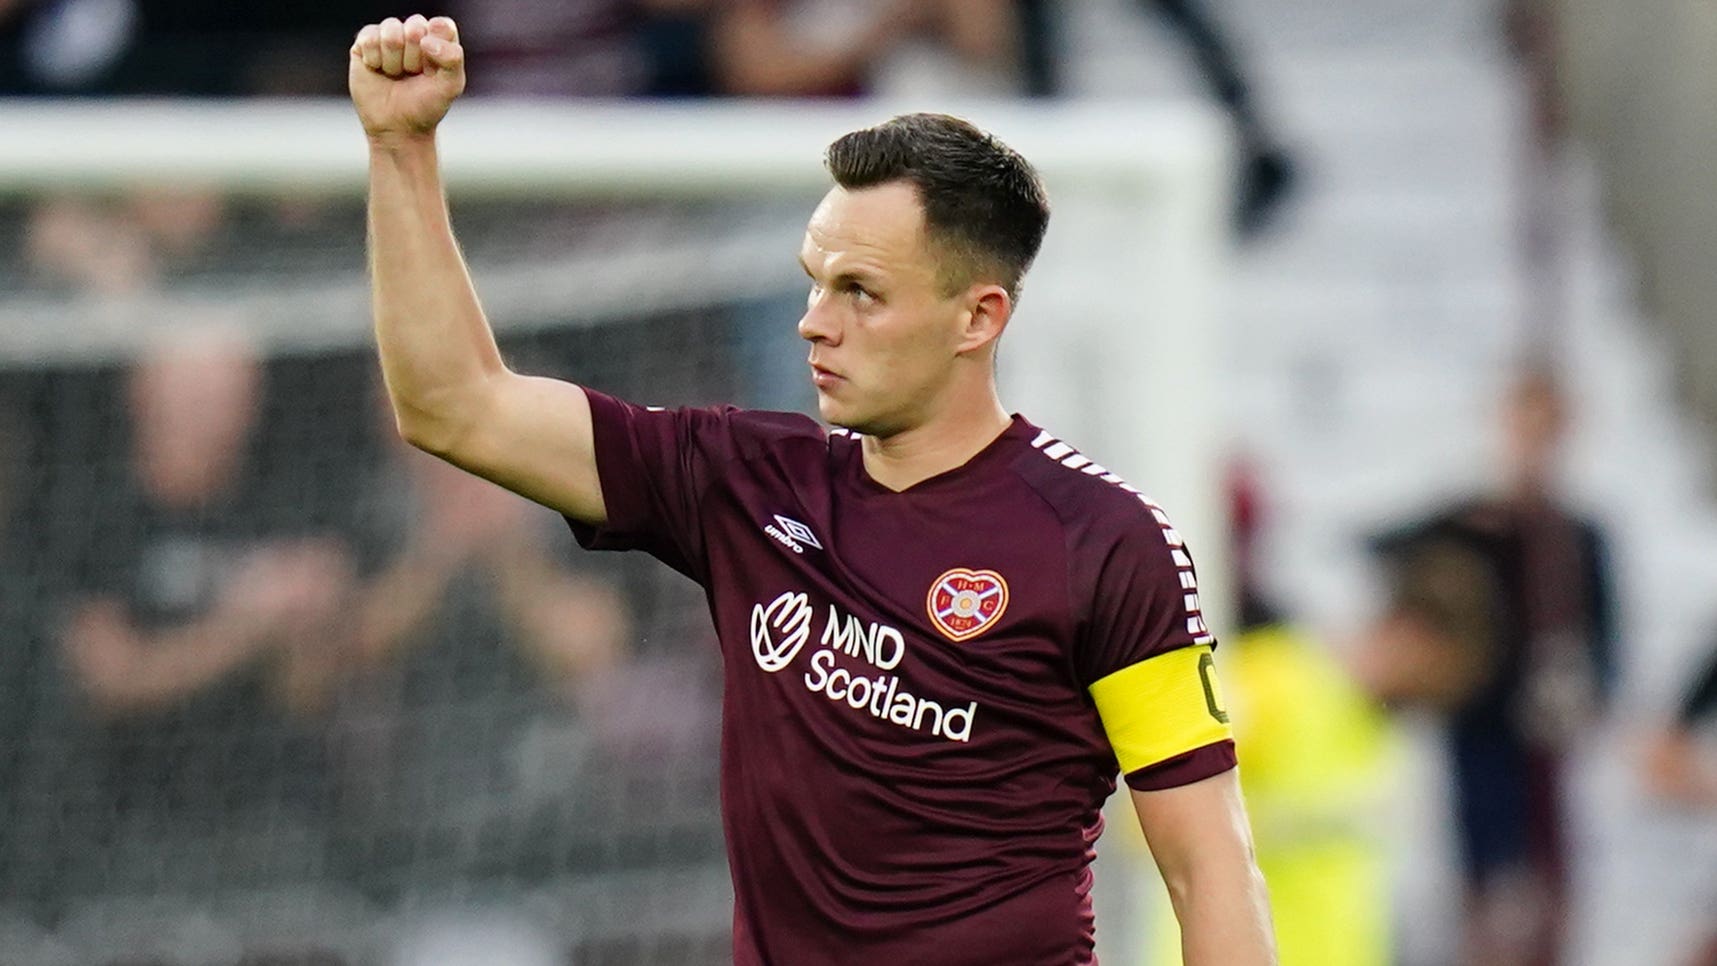 Lawrence Shankland nets twice as Hearts see off St Mirren